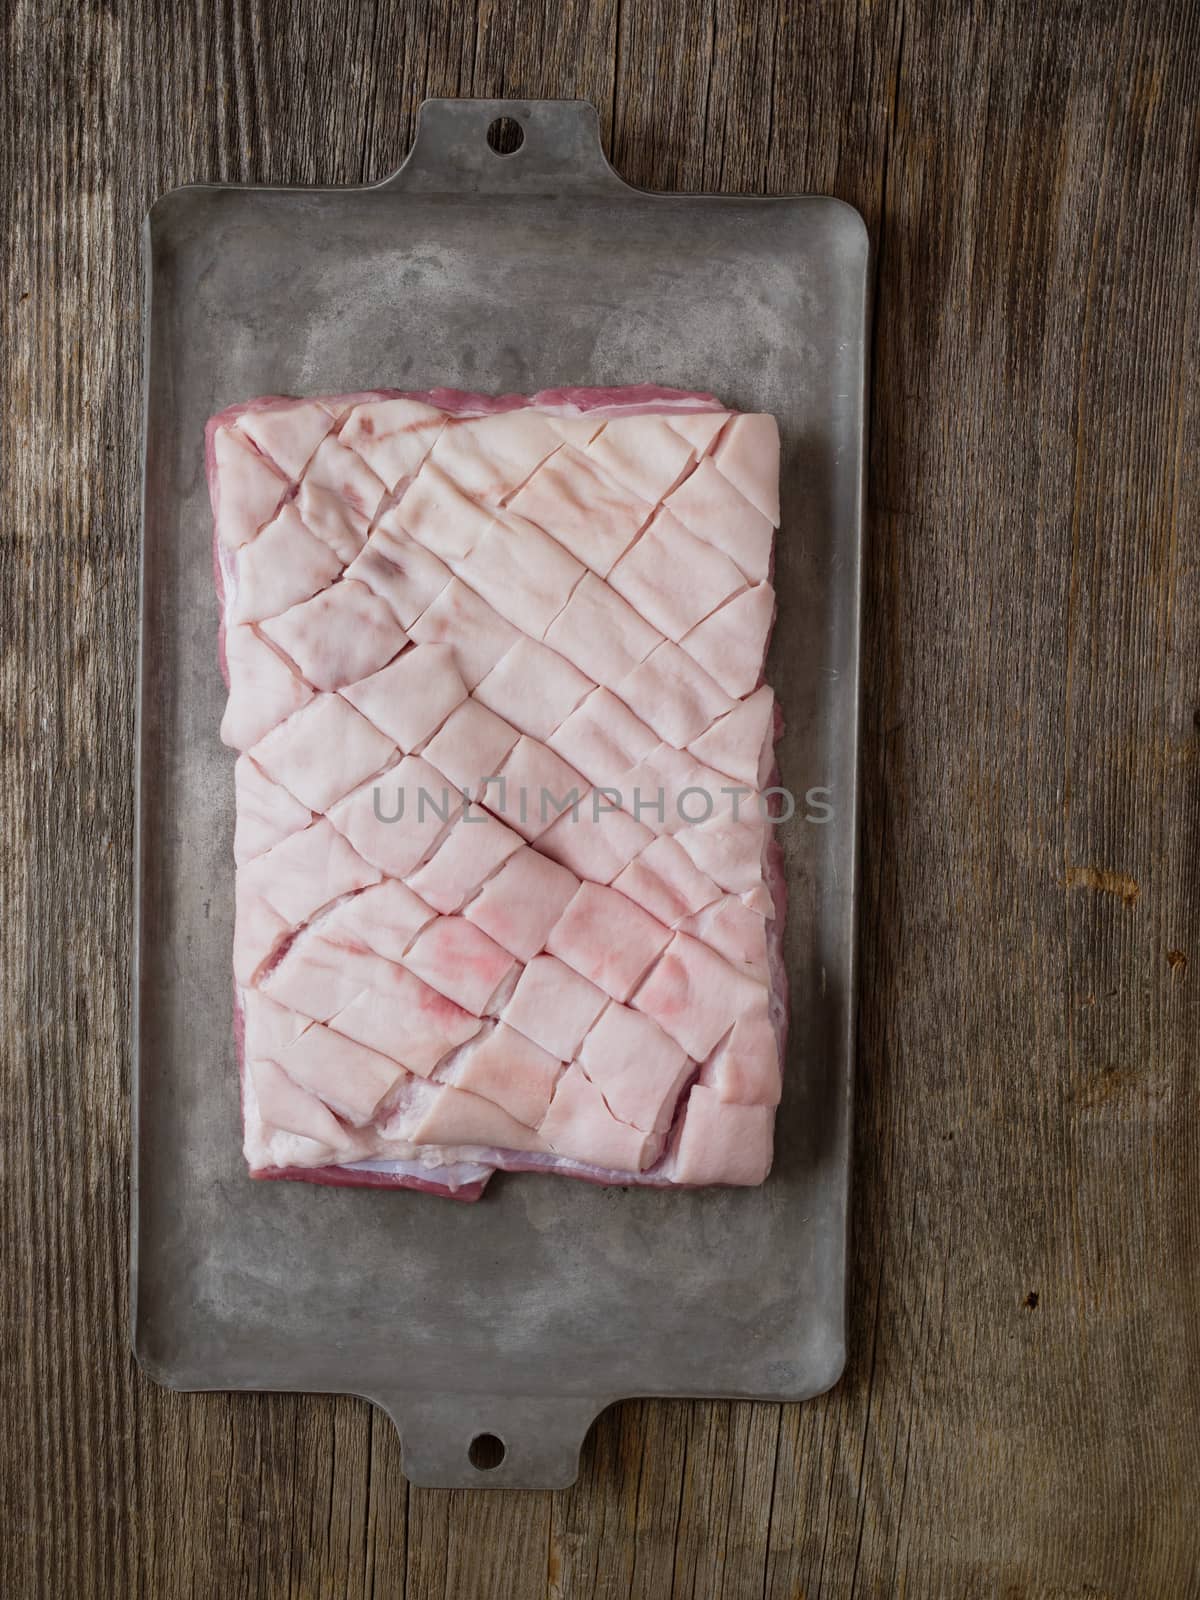 rustic raw uncooked pork belly by zkruger